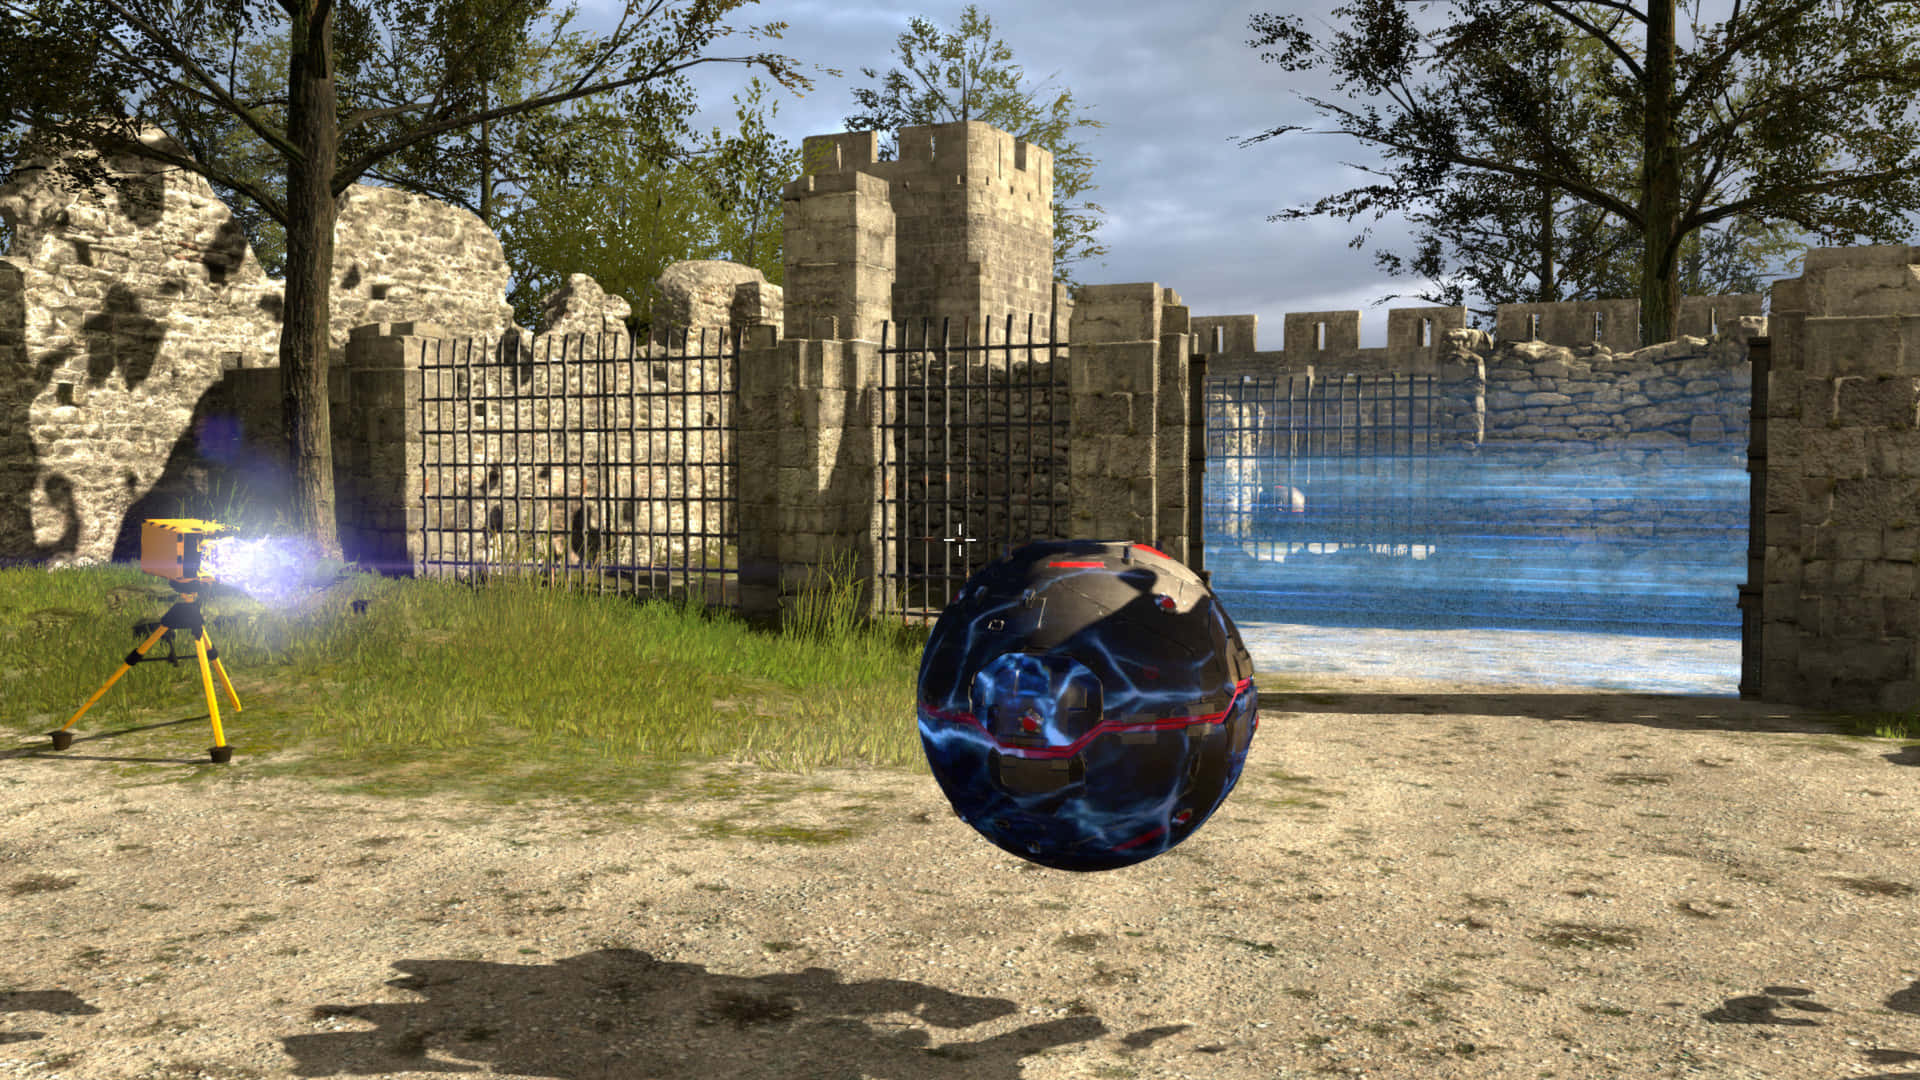 The Talos Principle Background Of A Jammer and Bomb